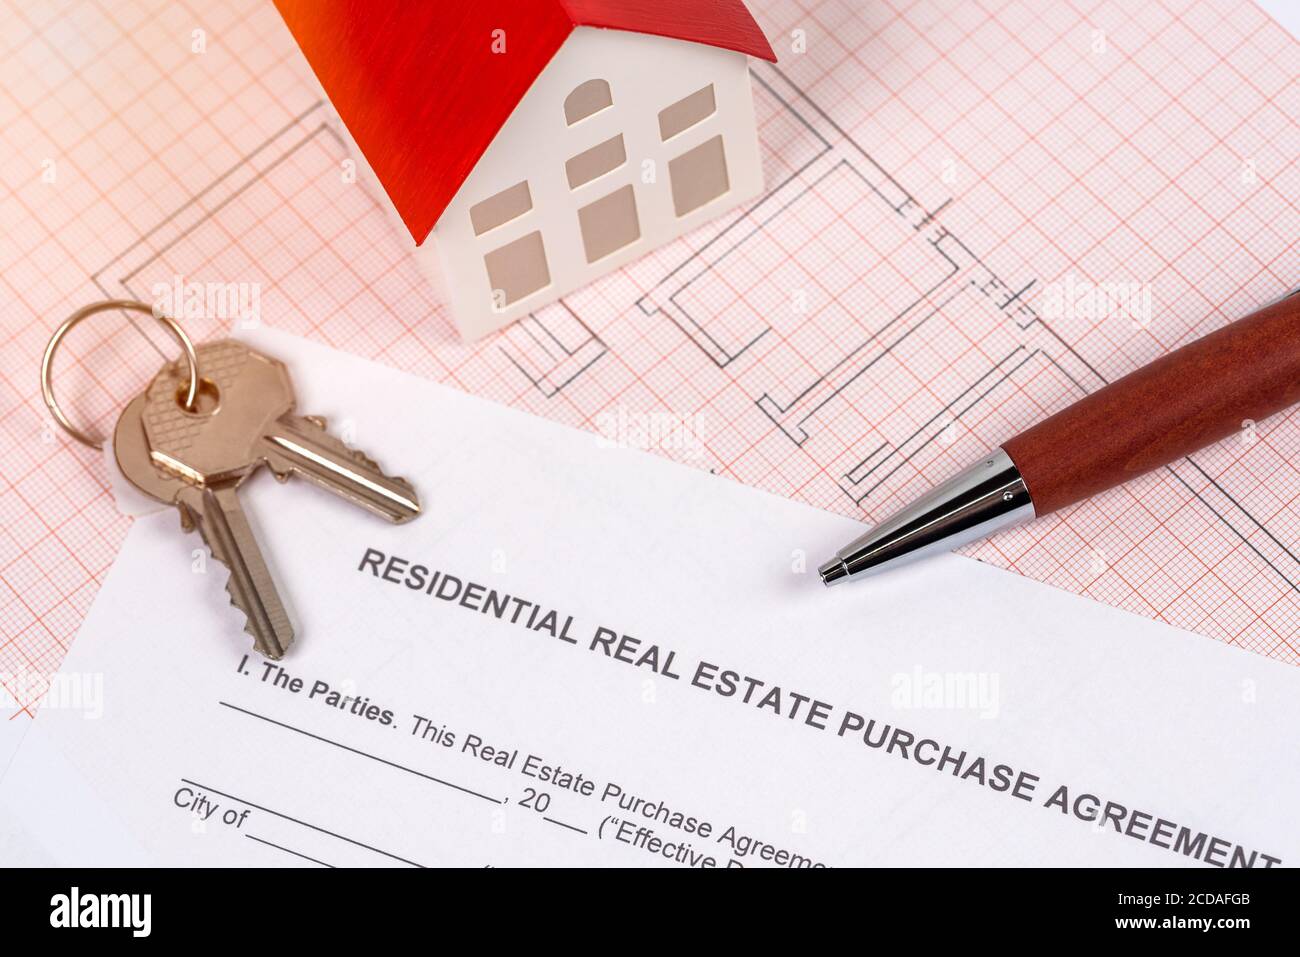 Keys, house model and a pen lying on a real estate purchase contract and a floor plan. Rreal estate purchase concept. Stock Photo